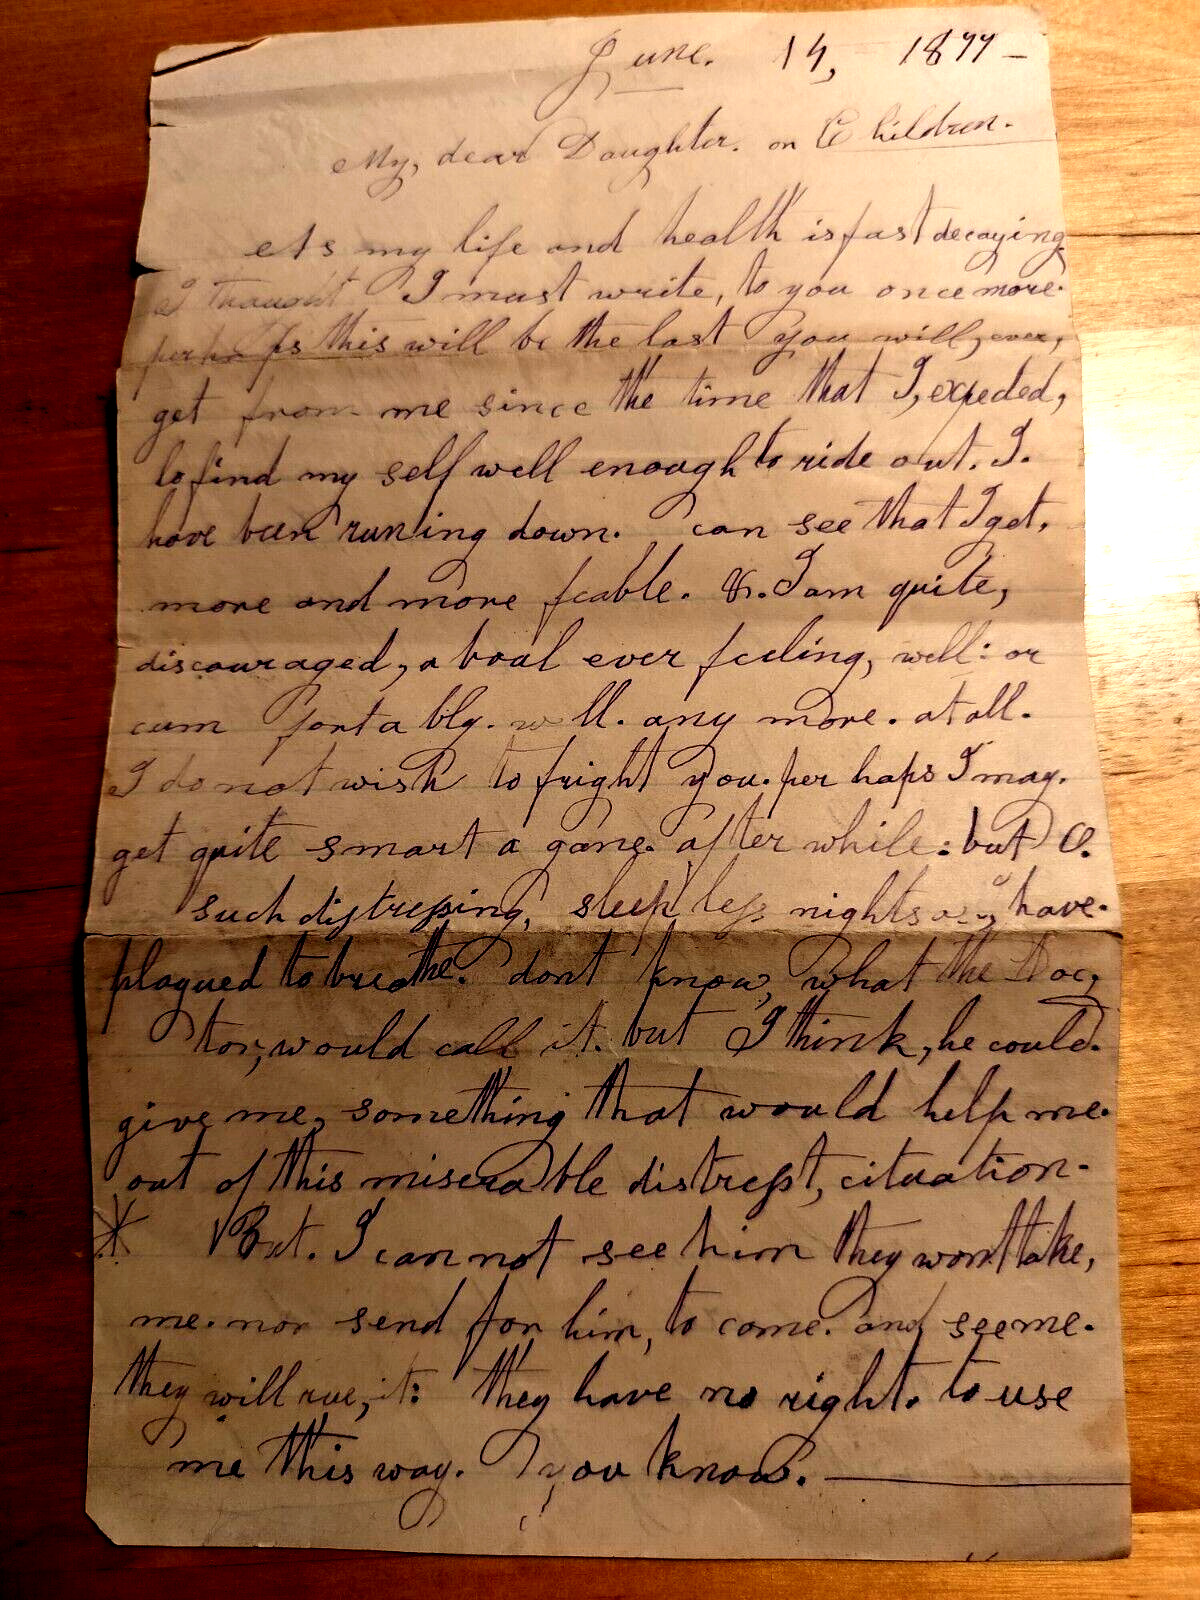 1877 Antique Letter: Dramatic Final Letter to His Children before Death